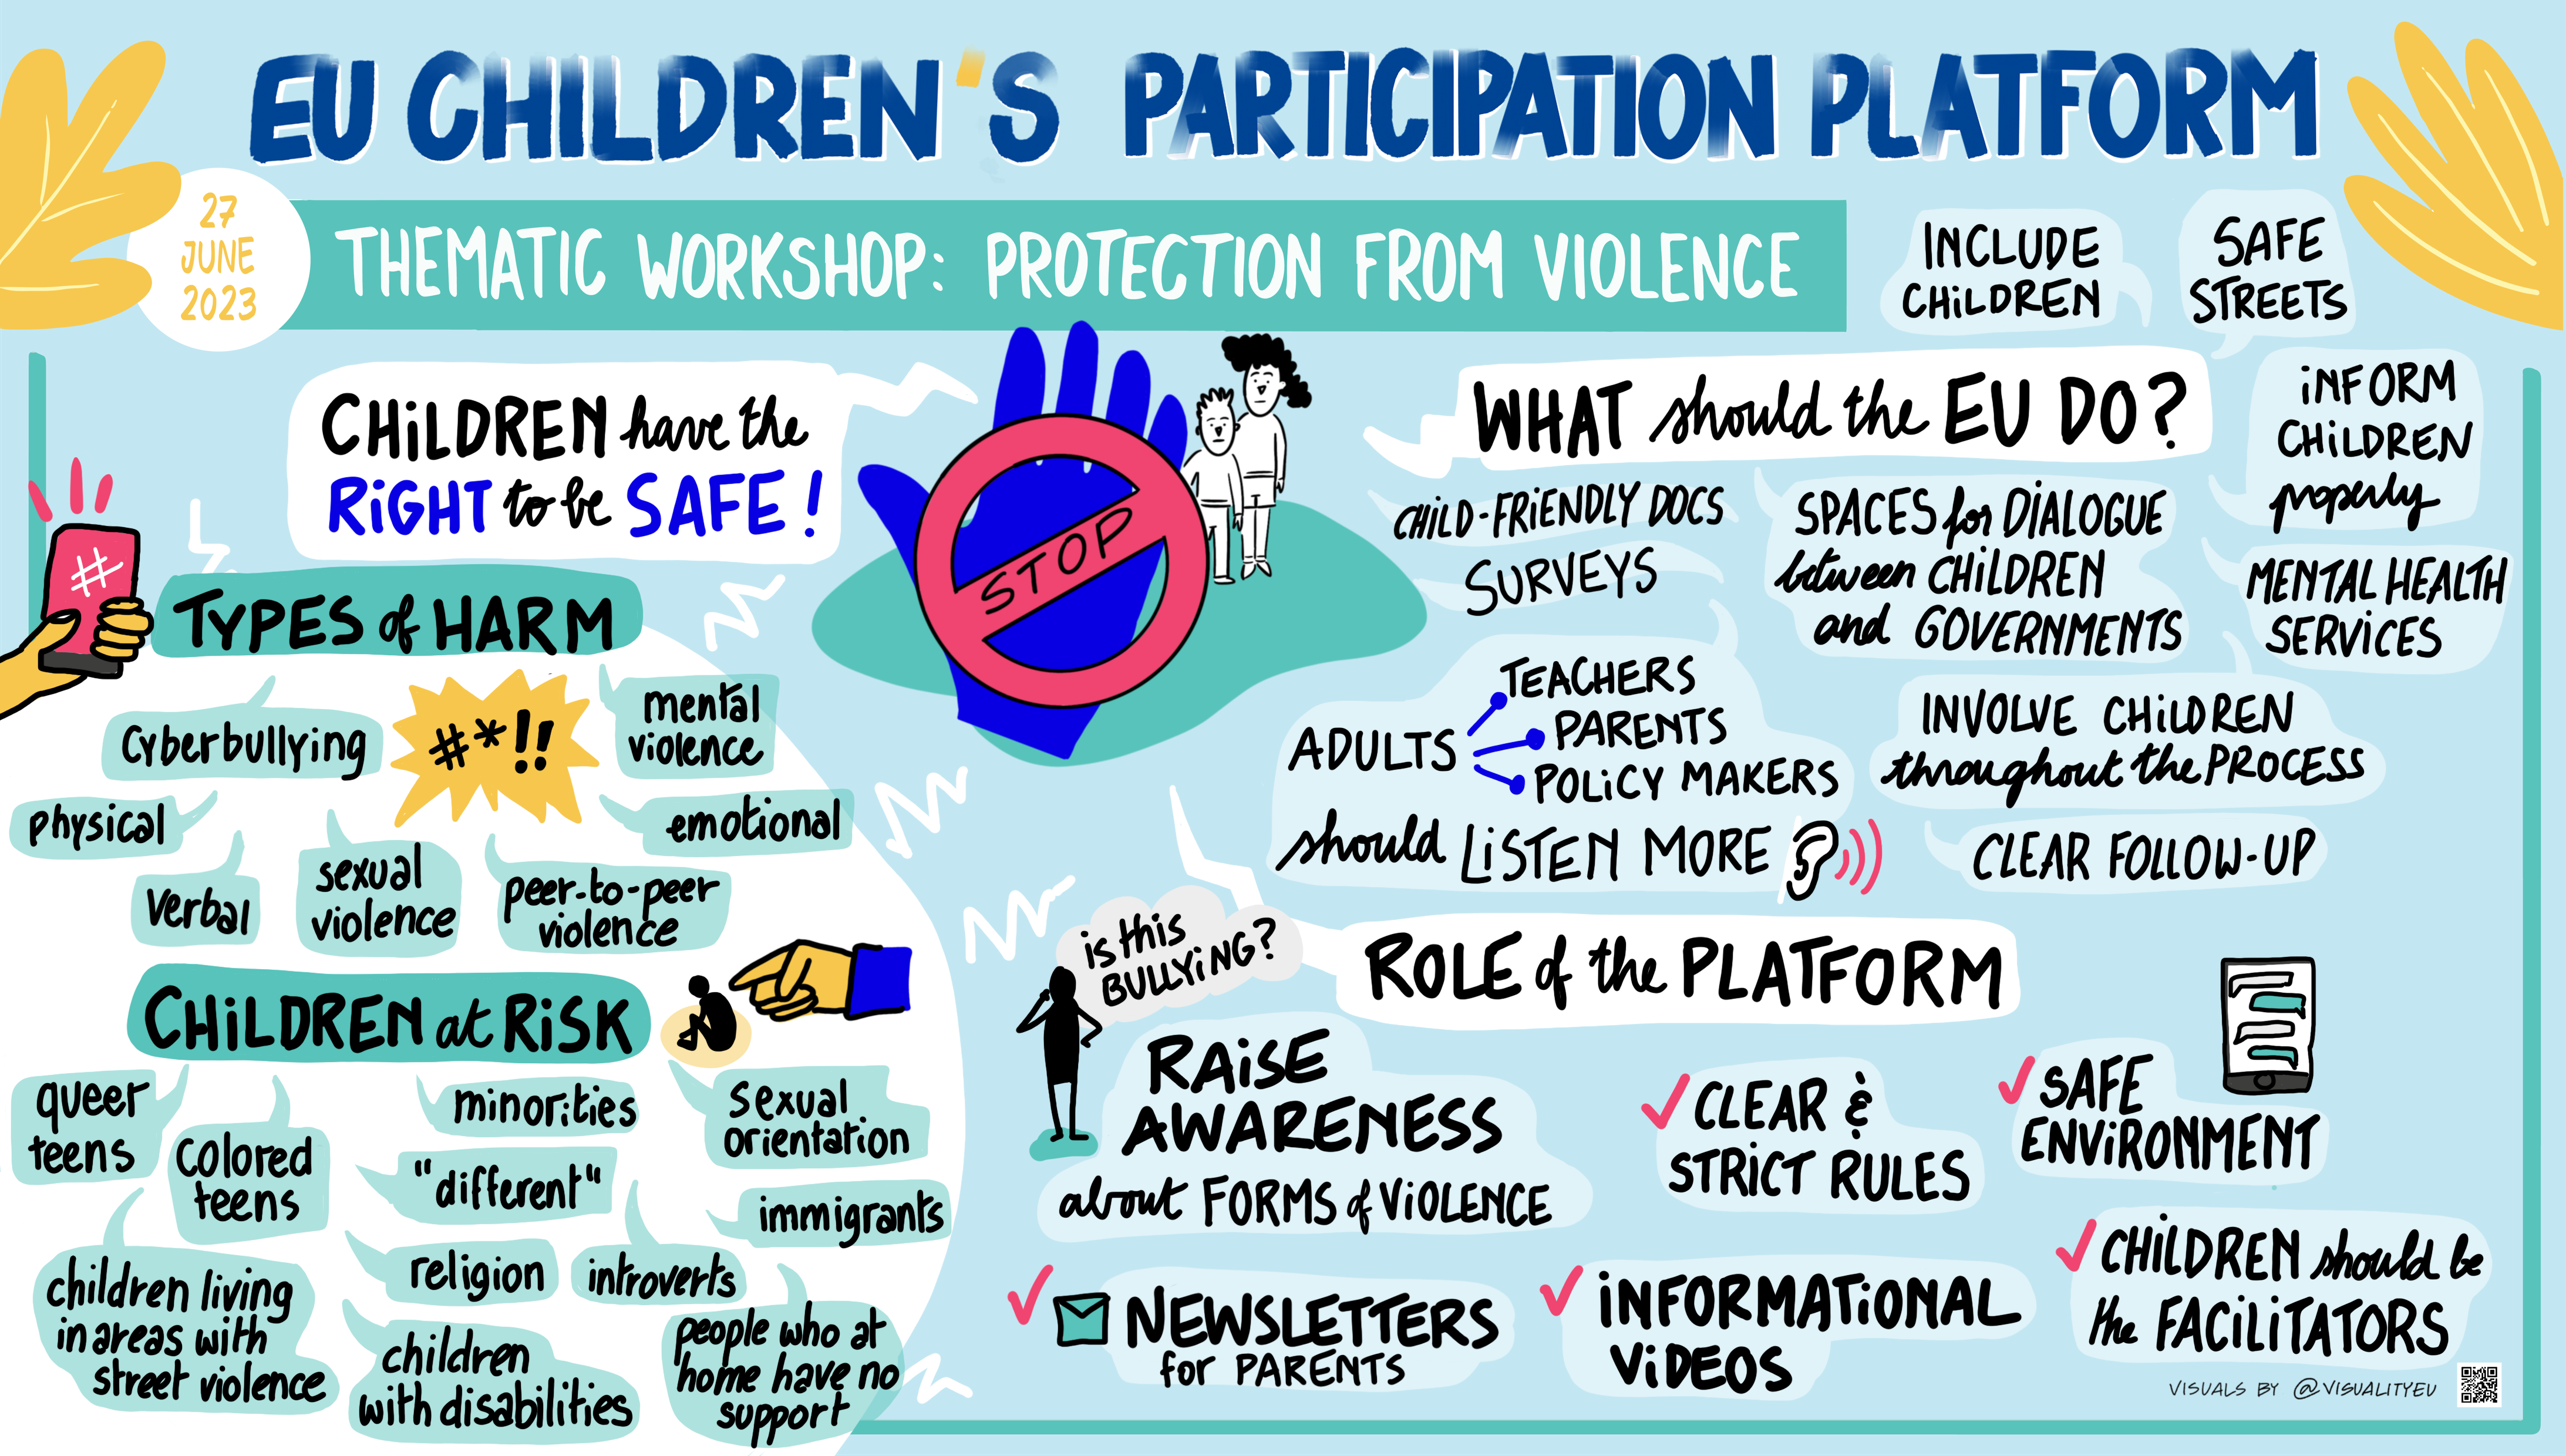 Main points discussed in the Protection from Violence workshop. Such as: types of harm, children at risk, what the EU should do. 